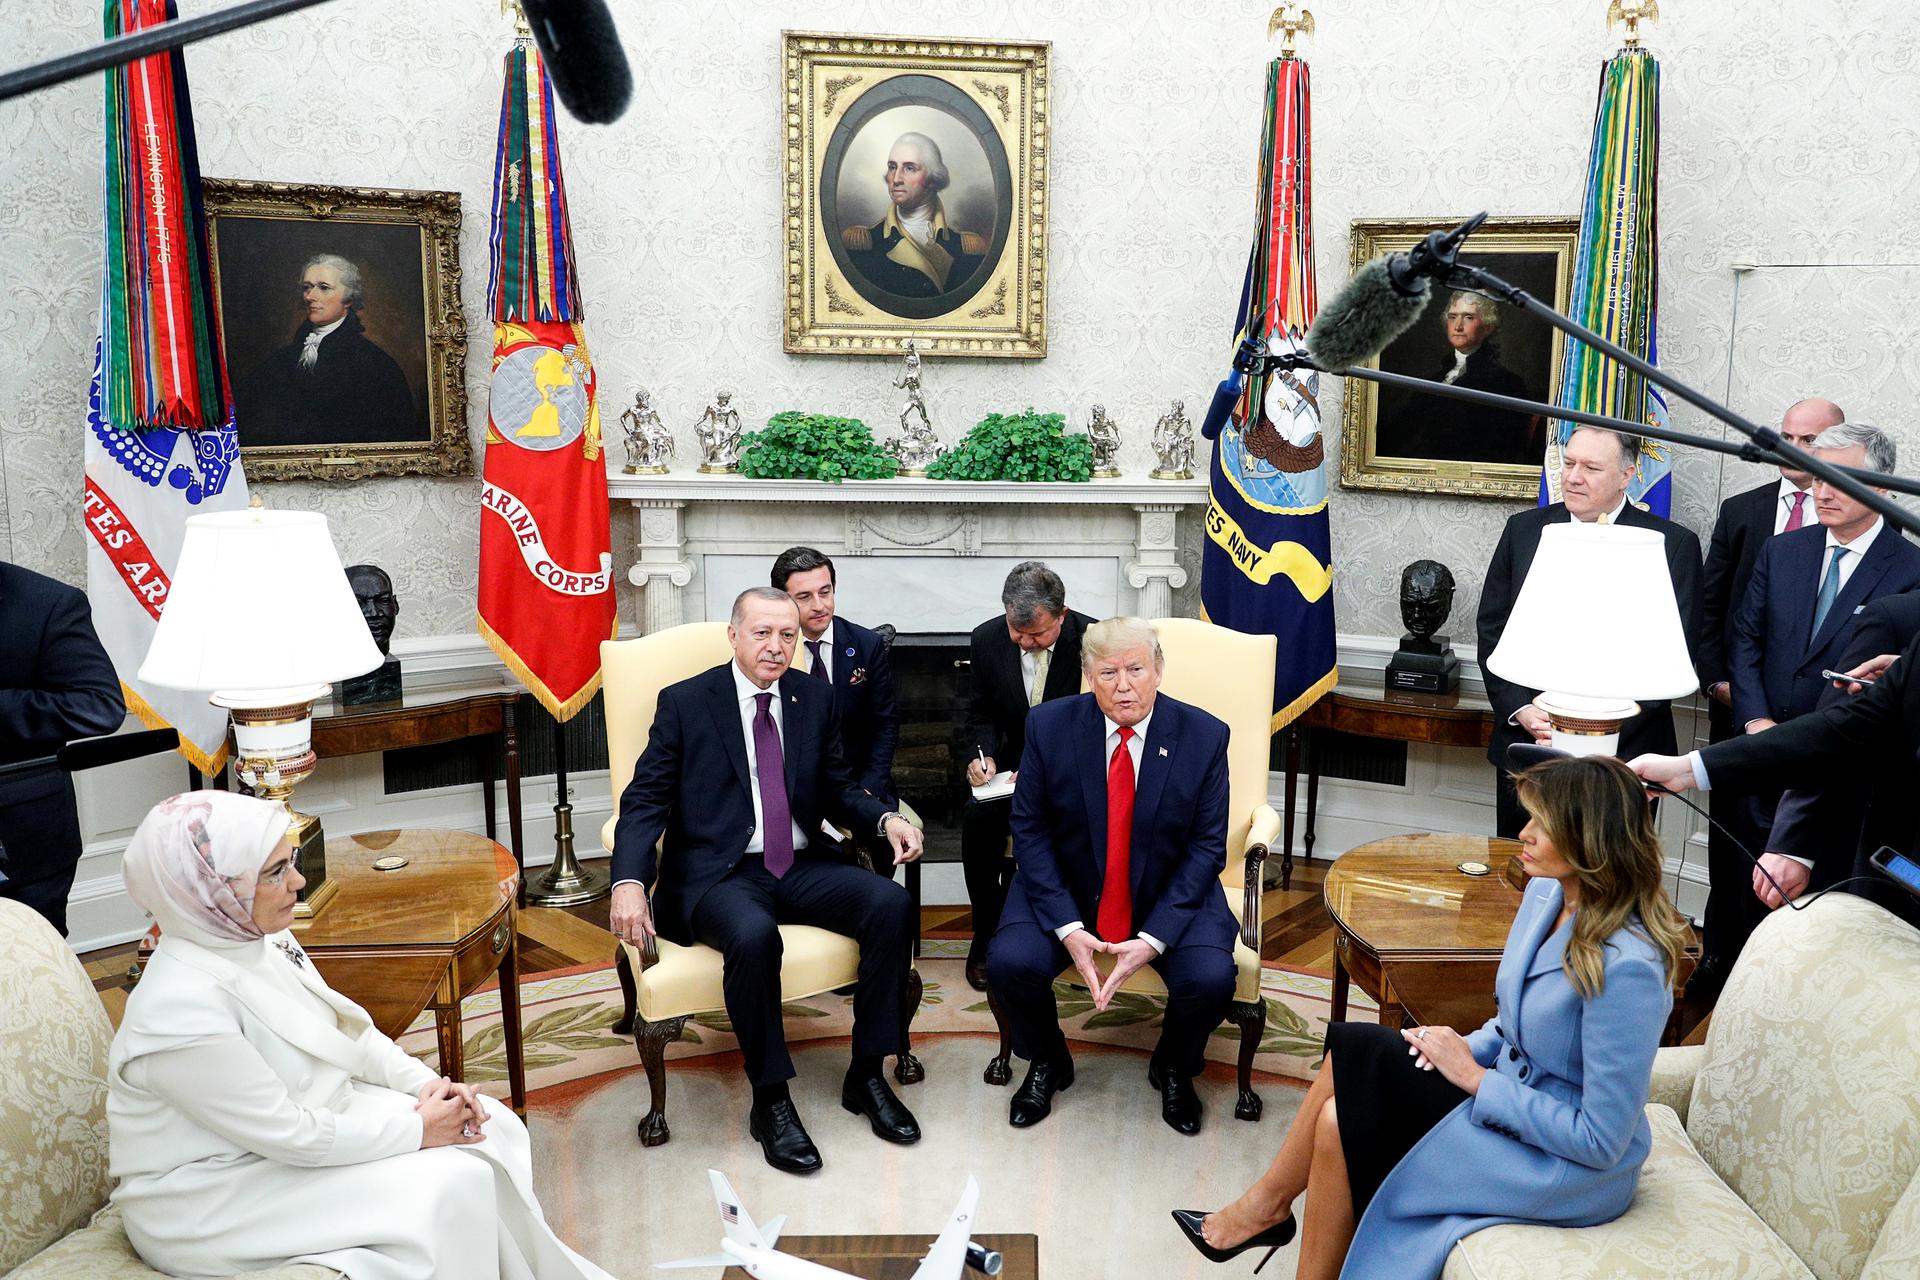 US President Donald Trump and first lady Melania Trump meet with Turkey's President Tayyip Erdogan and Emine Erdogan in the Oval Office of the White House in Washington, D.C., on November 13, 2019.